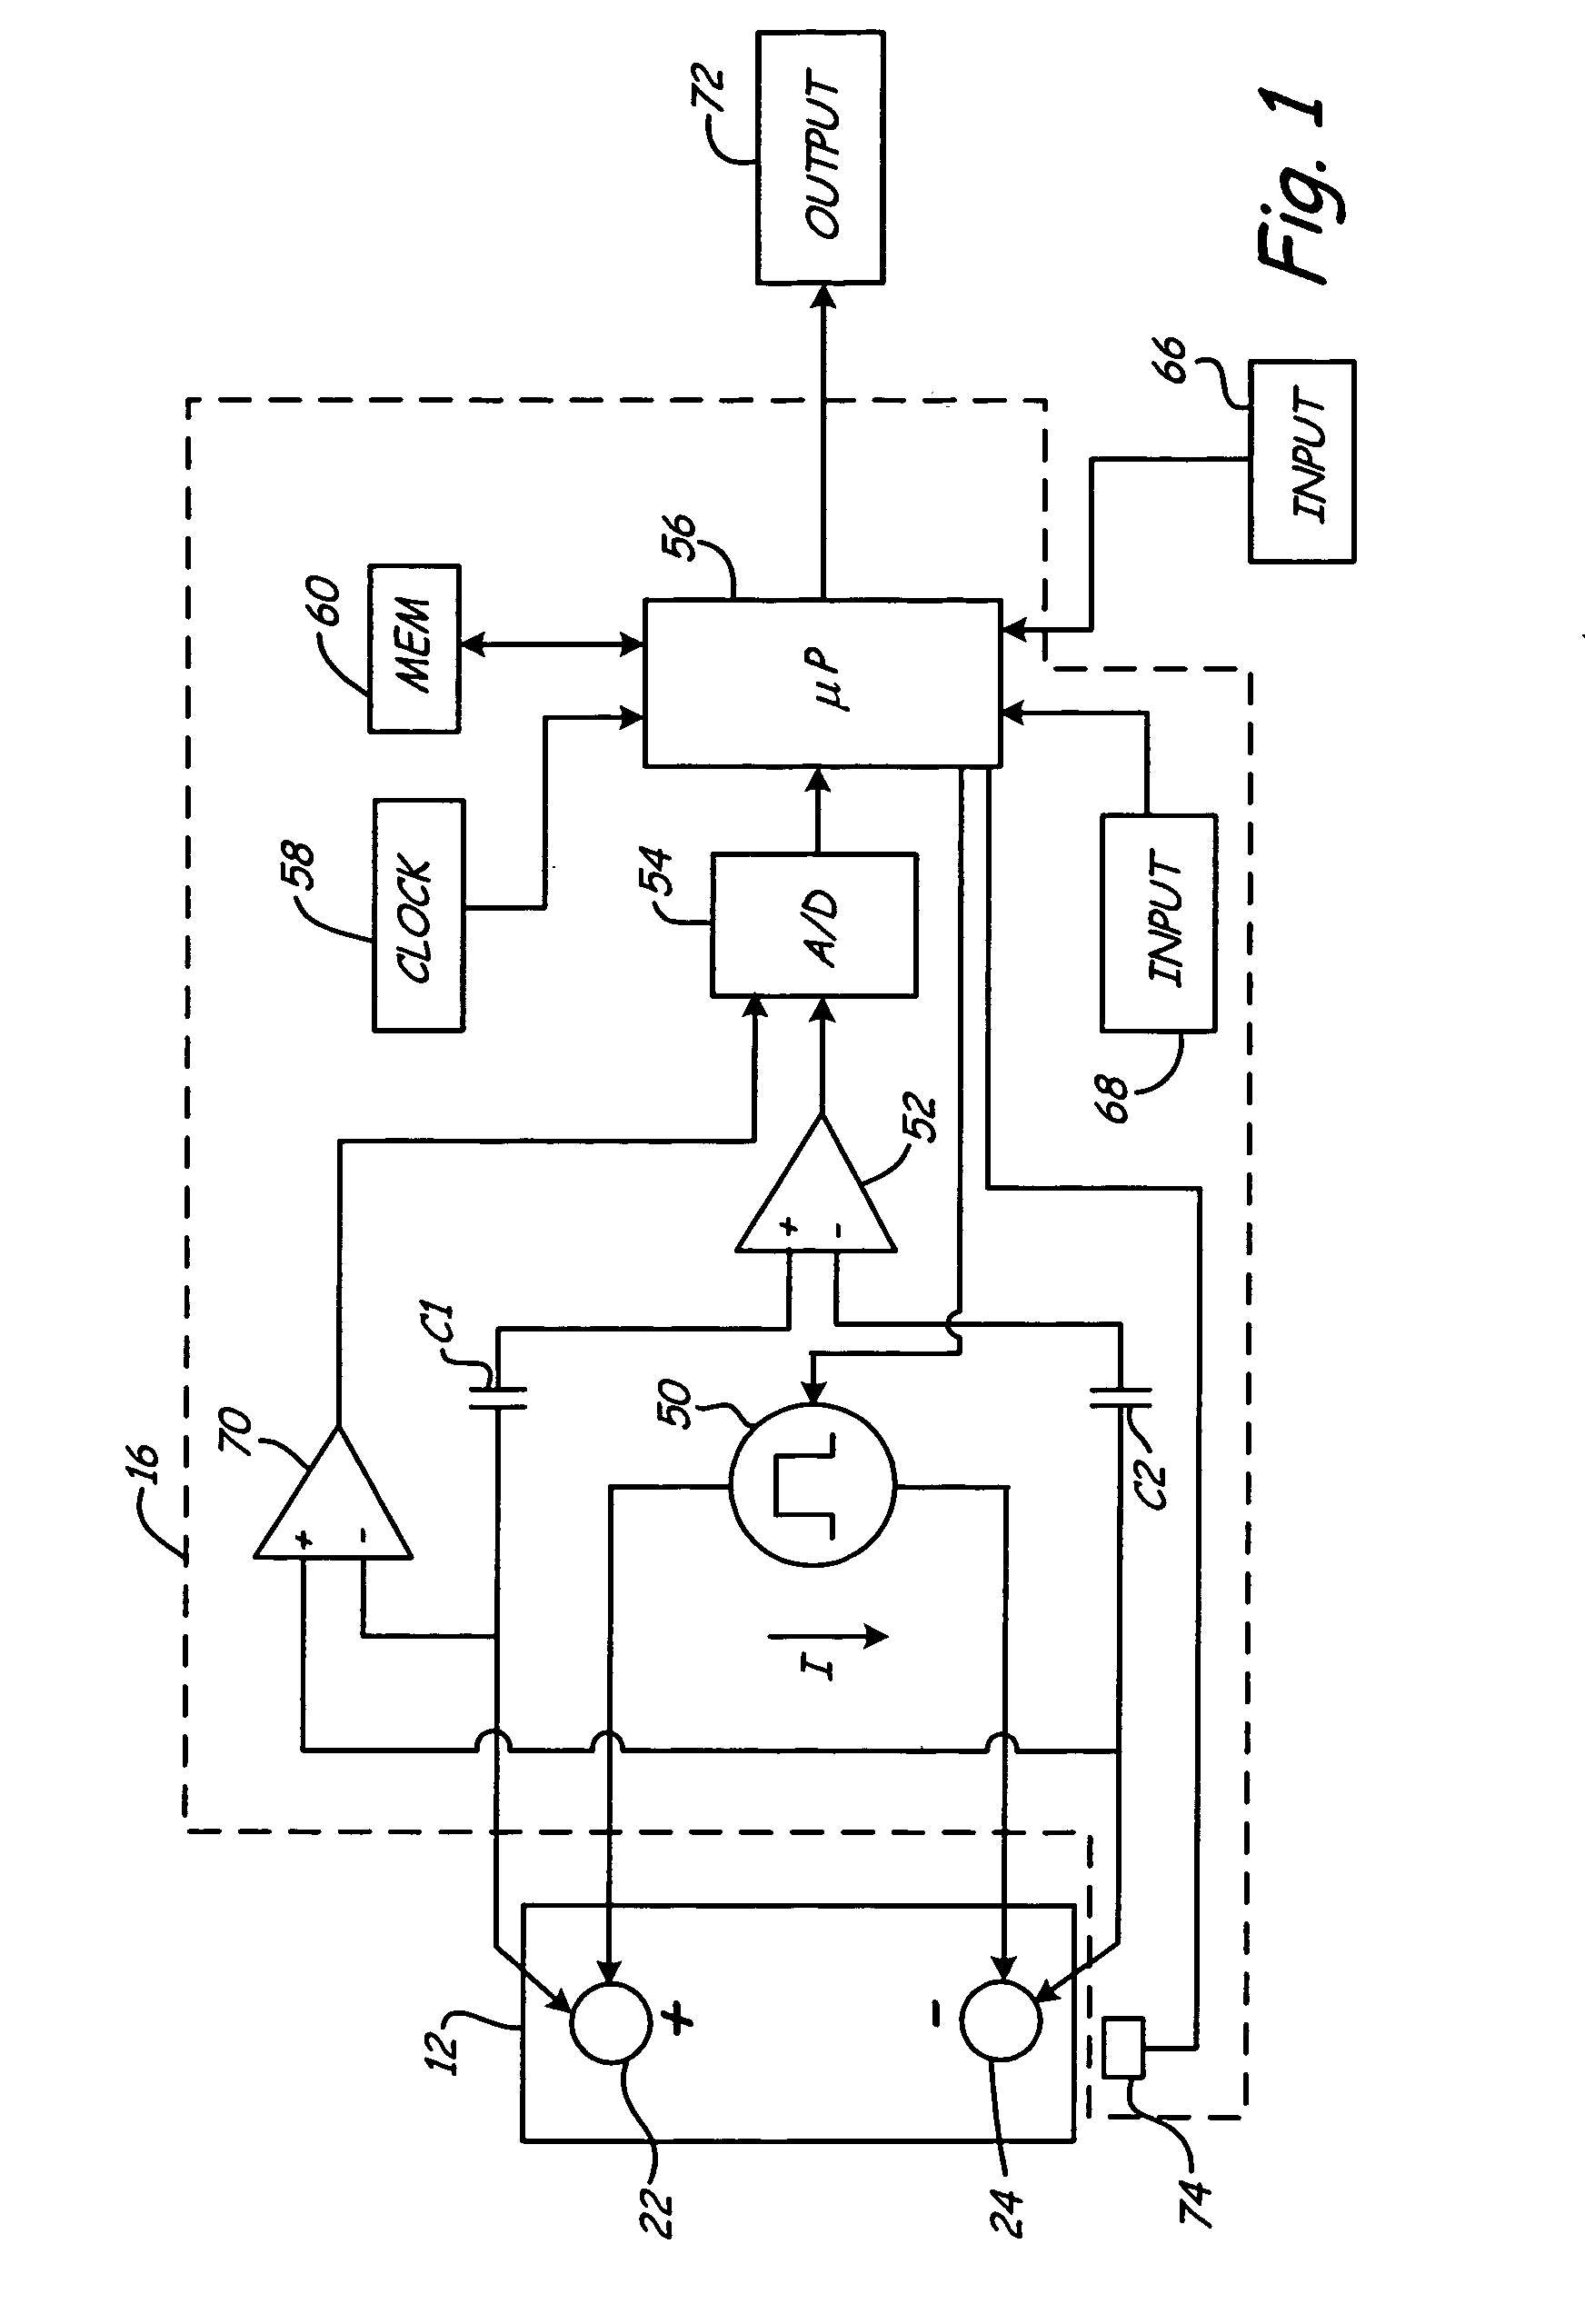 Battery tester capable of predicting a discharge voltage/discharge current of a battery